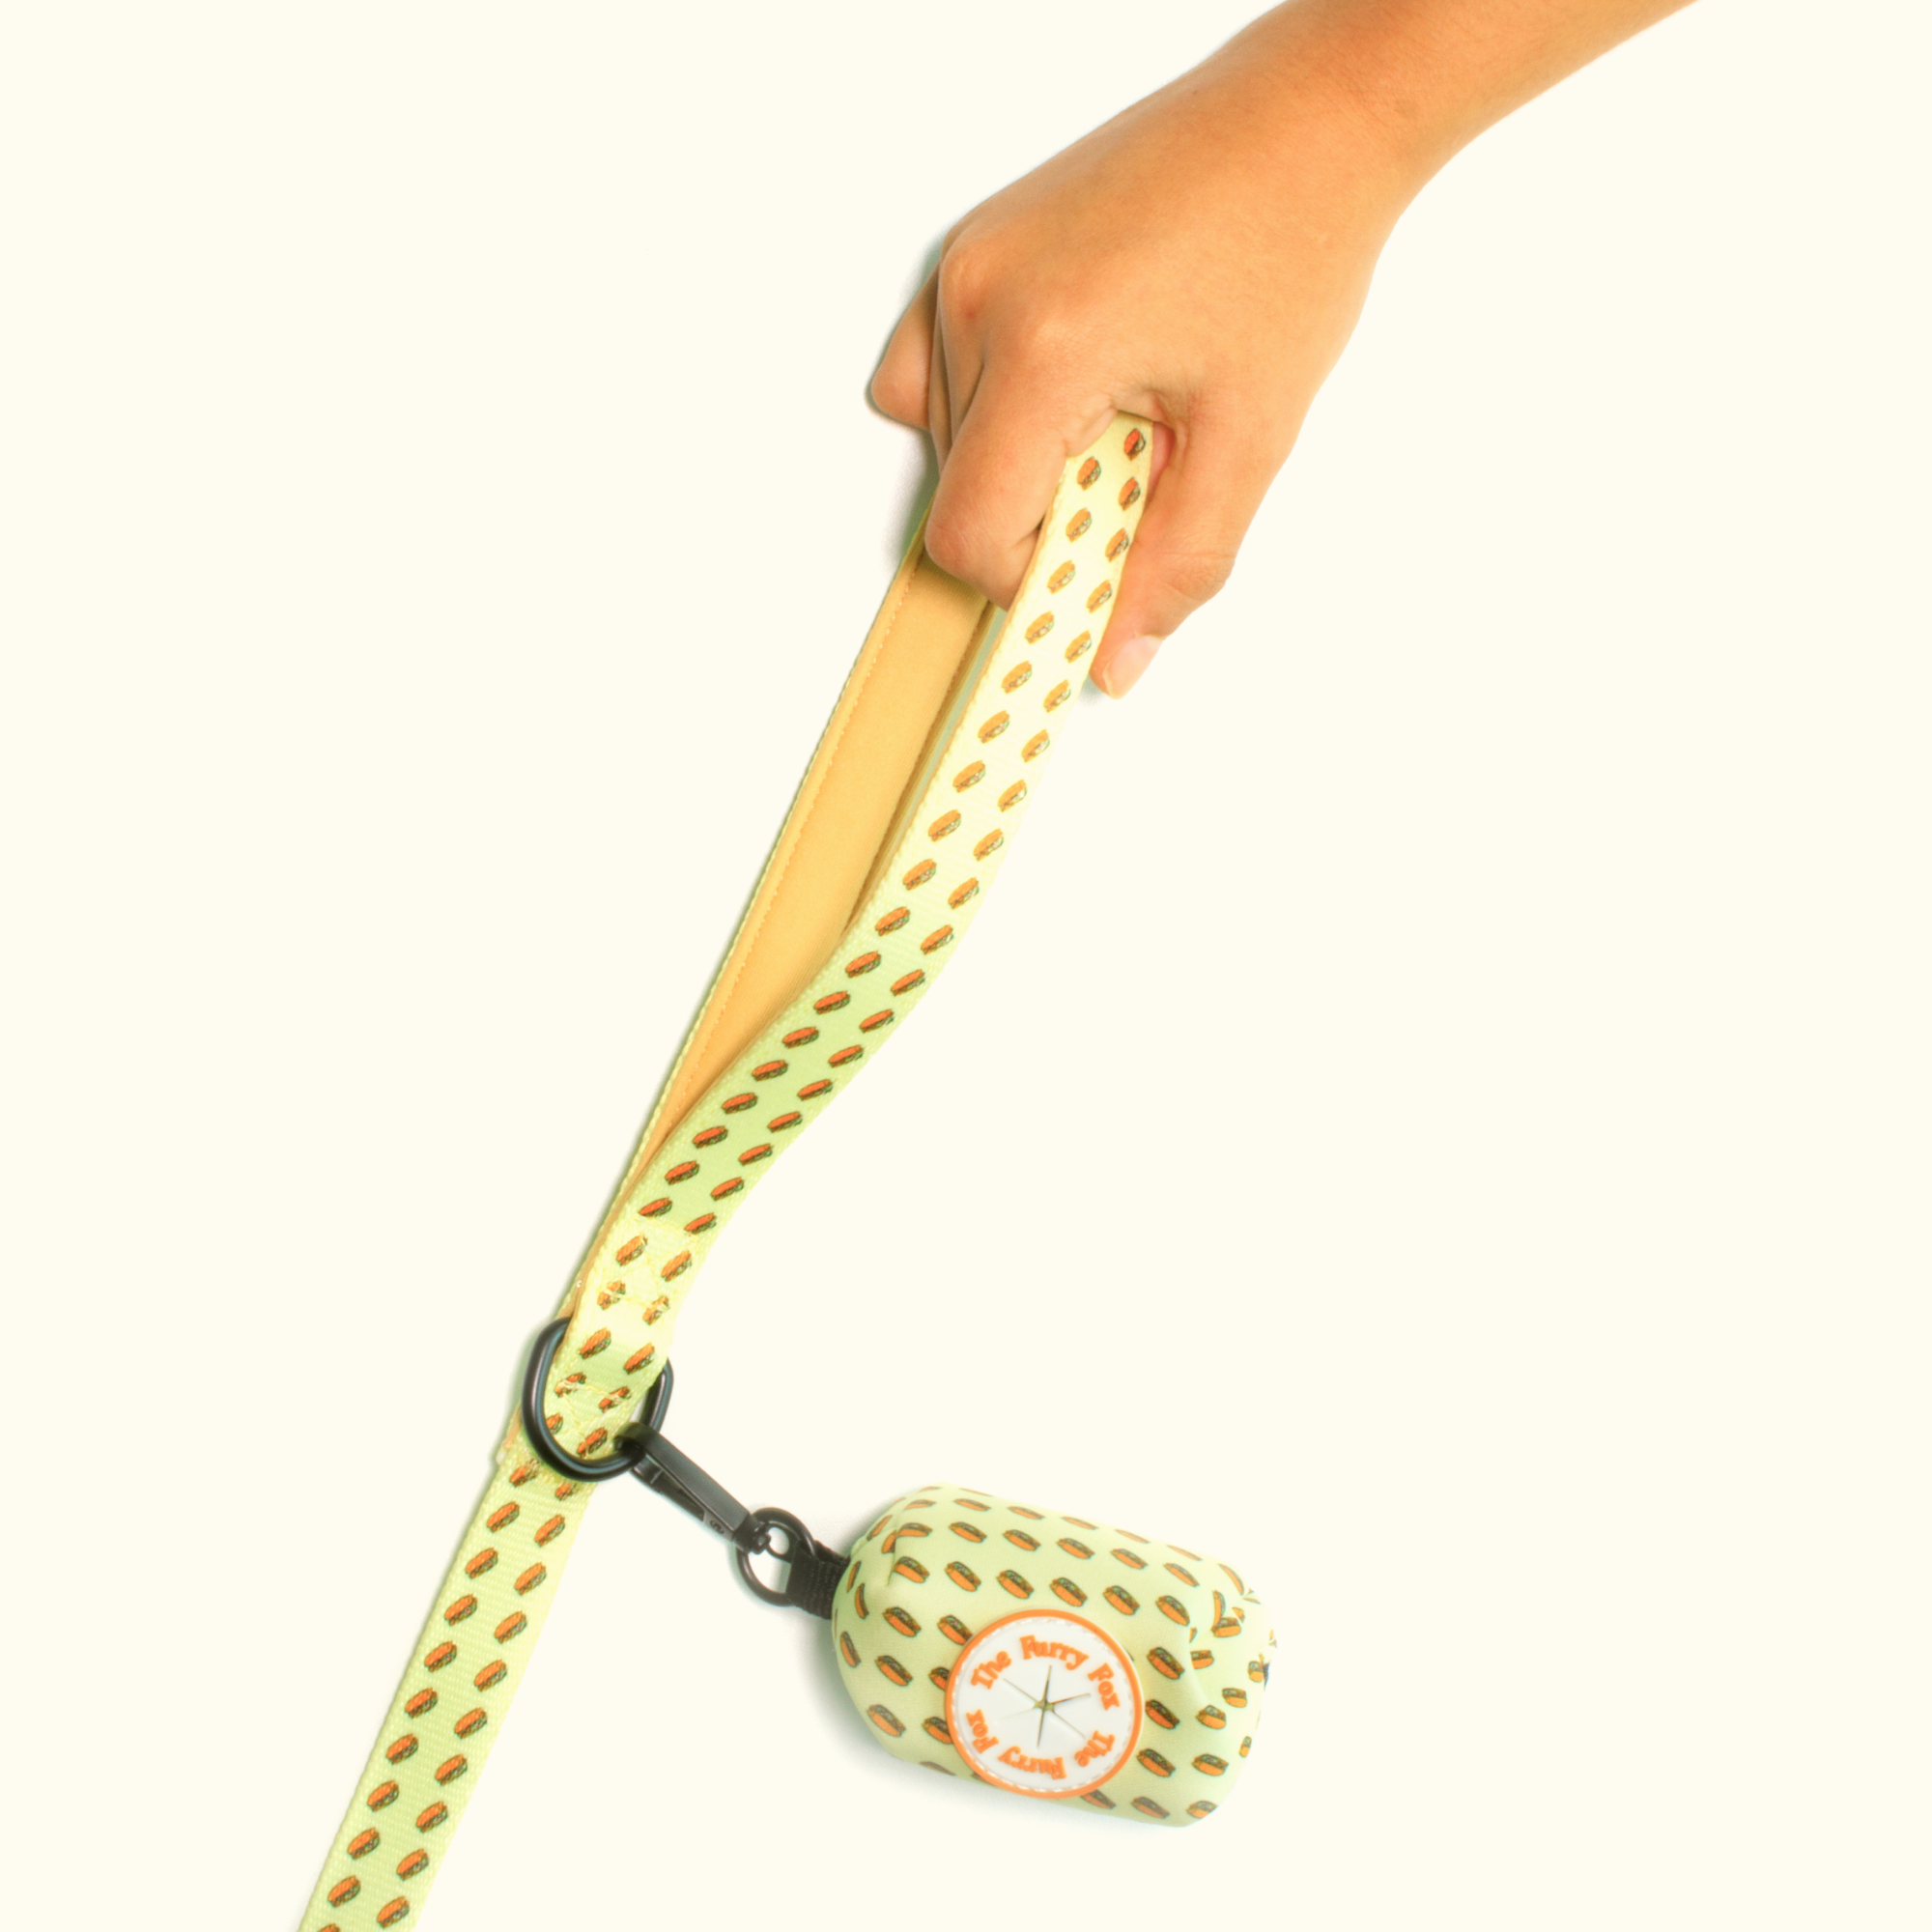 Paws and Slices: Adorable Burger Leash